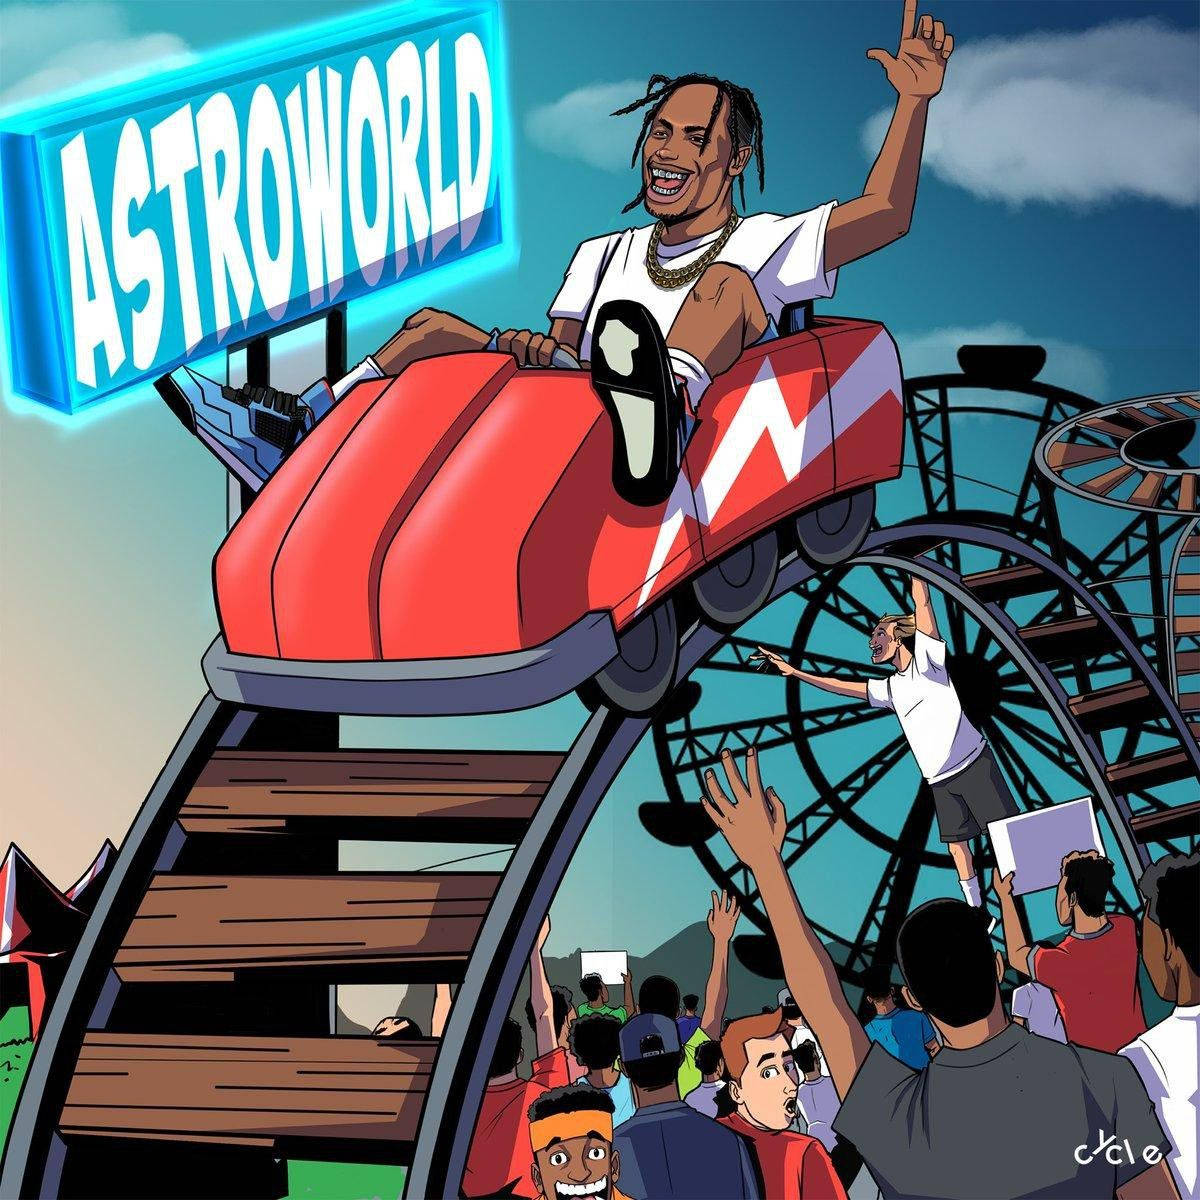 1200X1200 Astroworld Wallpaper and Background